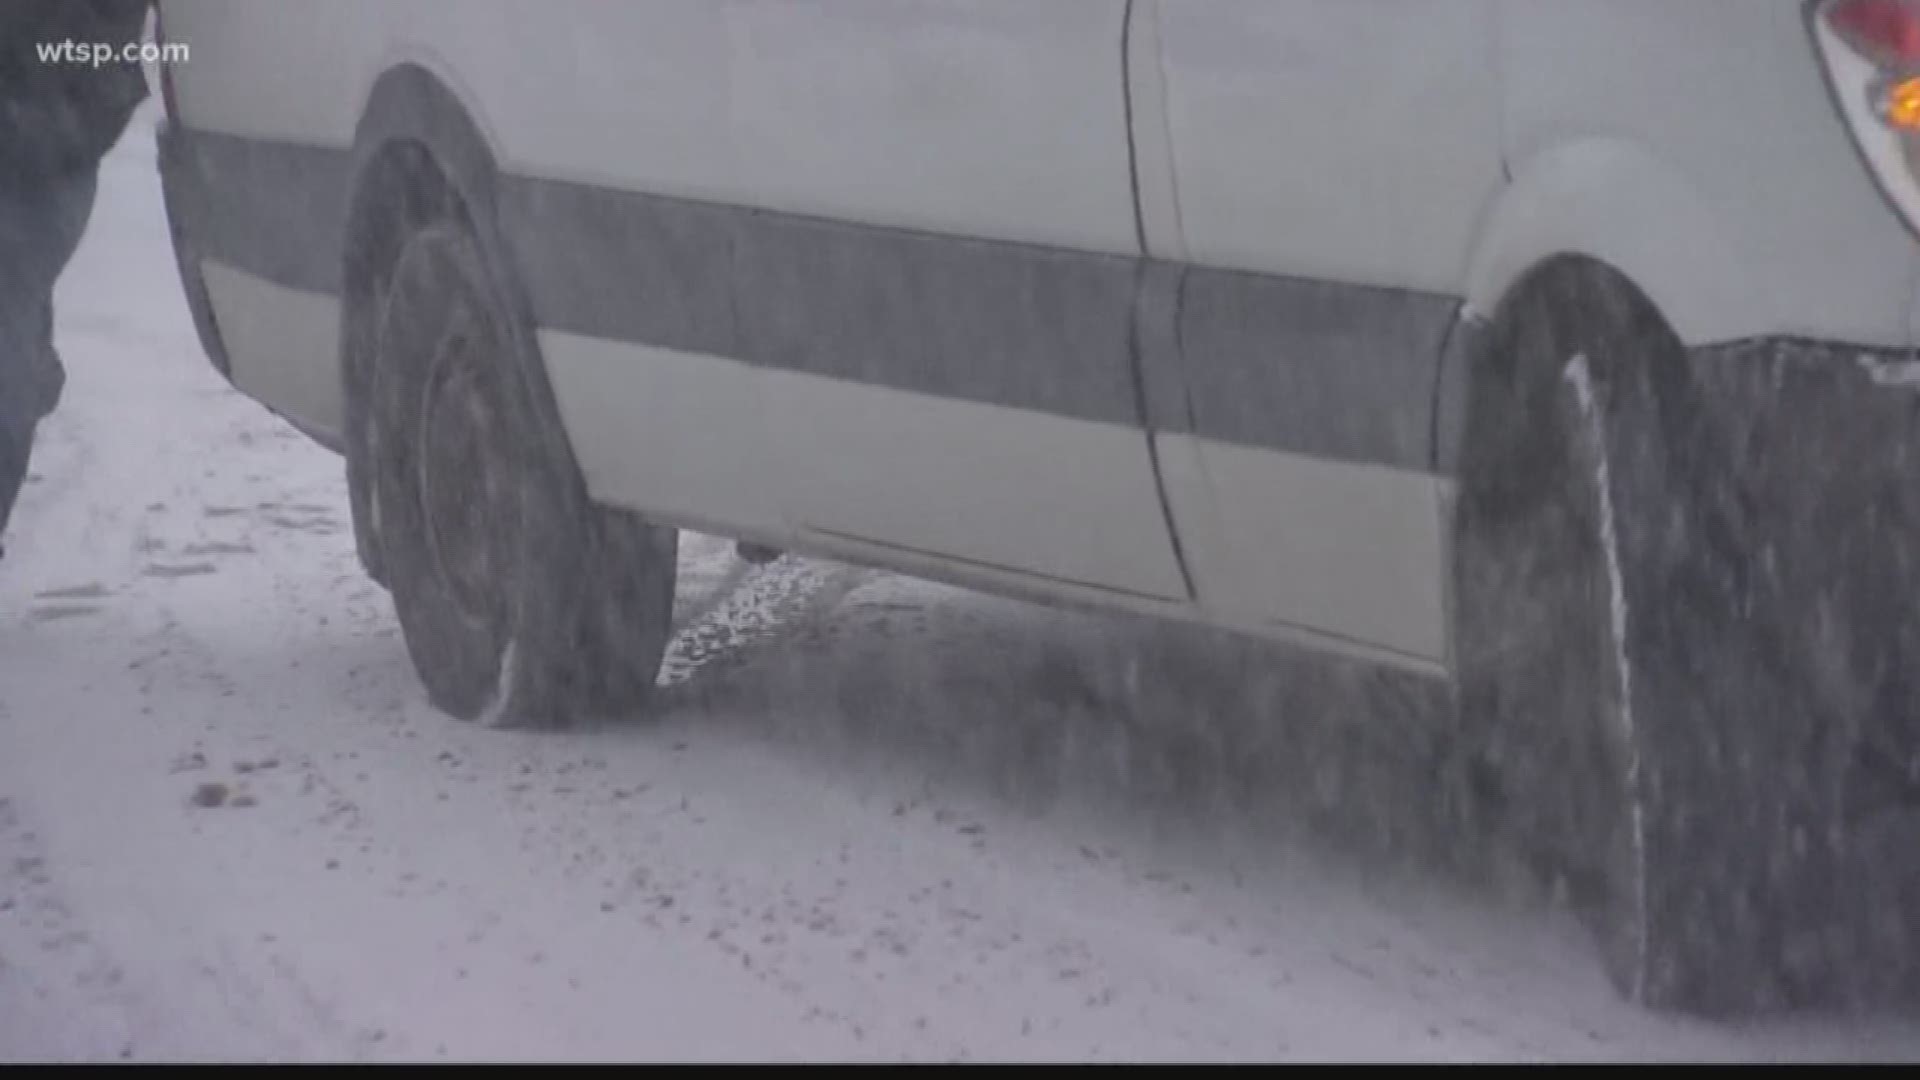 Wintery weather in the Rocky Mountains had some drivers scrambling to stay on the road.